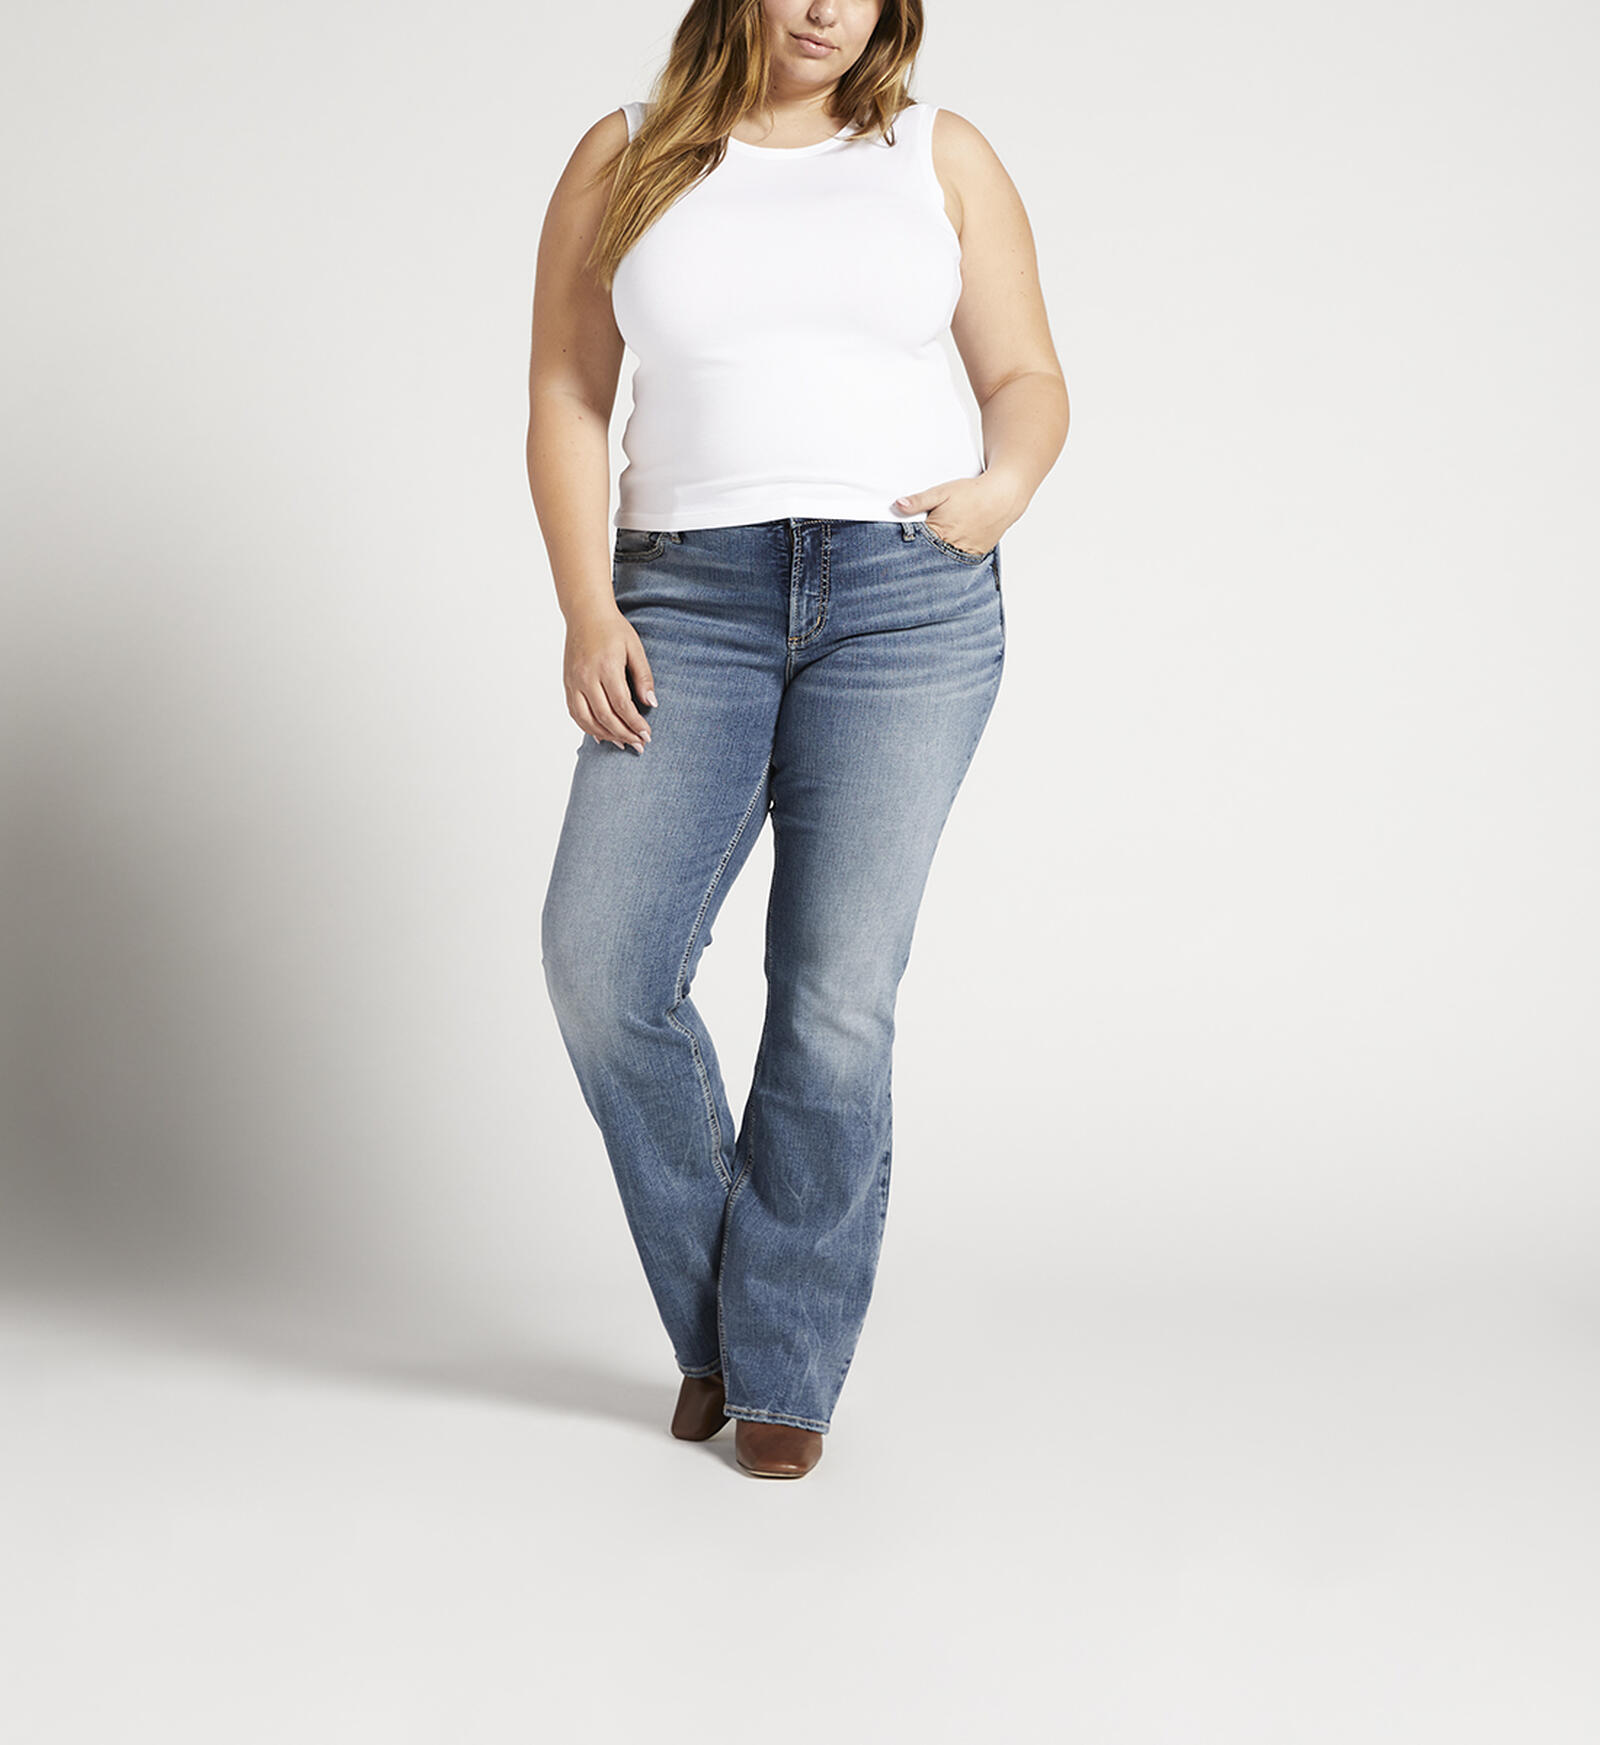 Buy Elyse Mid Rise Slim Jeans Plus Size for 52.00 | Silver Jeans